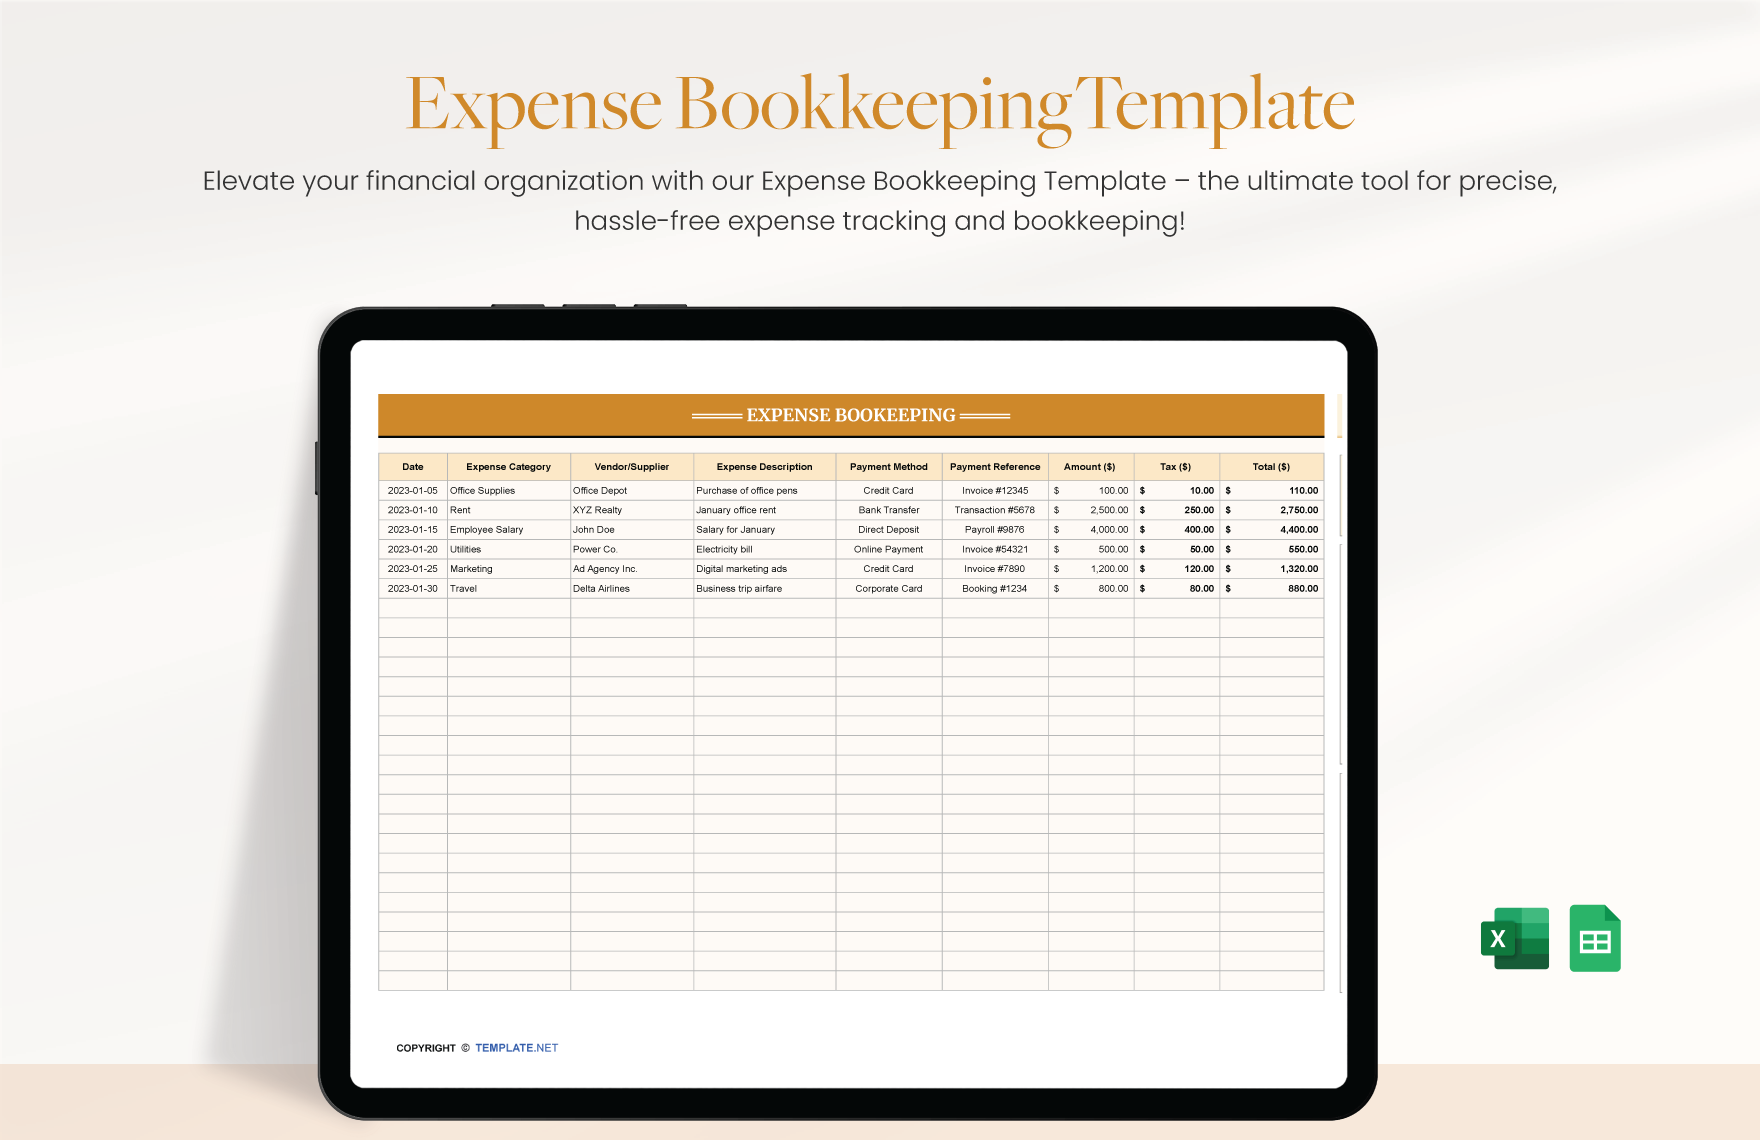 Expense Bookkeeping Template